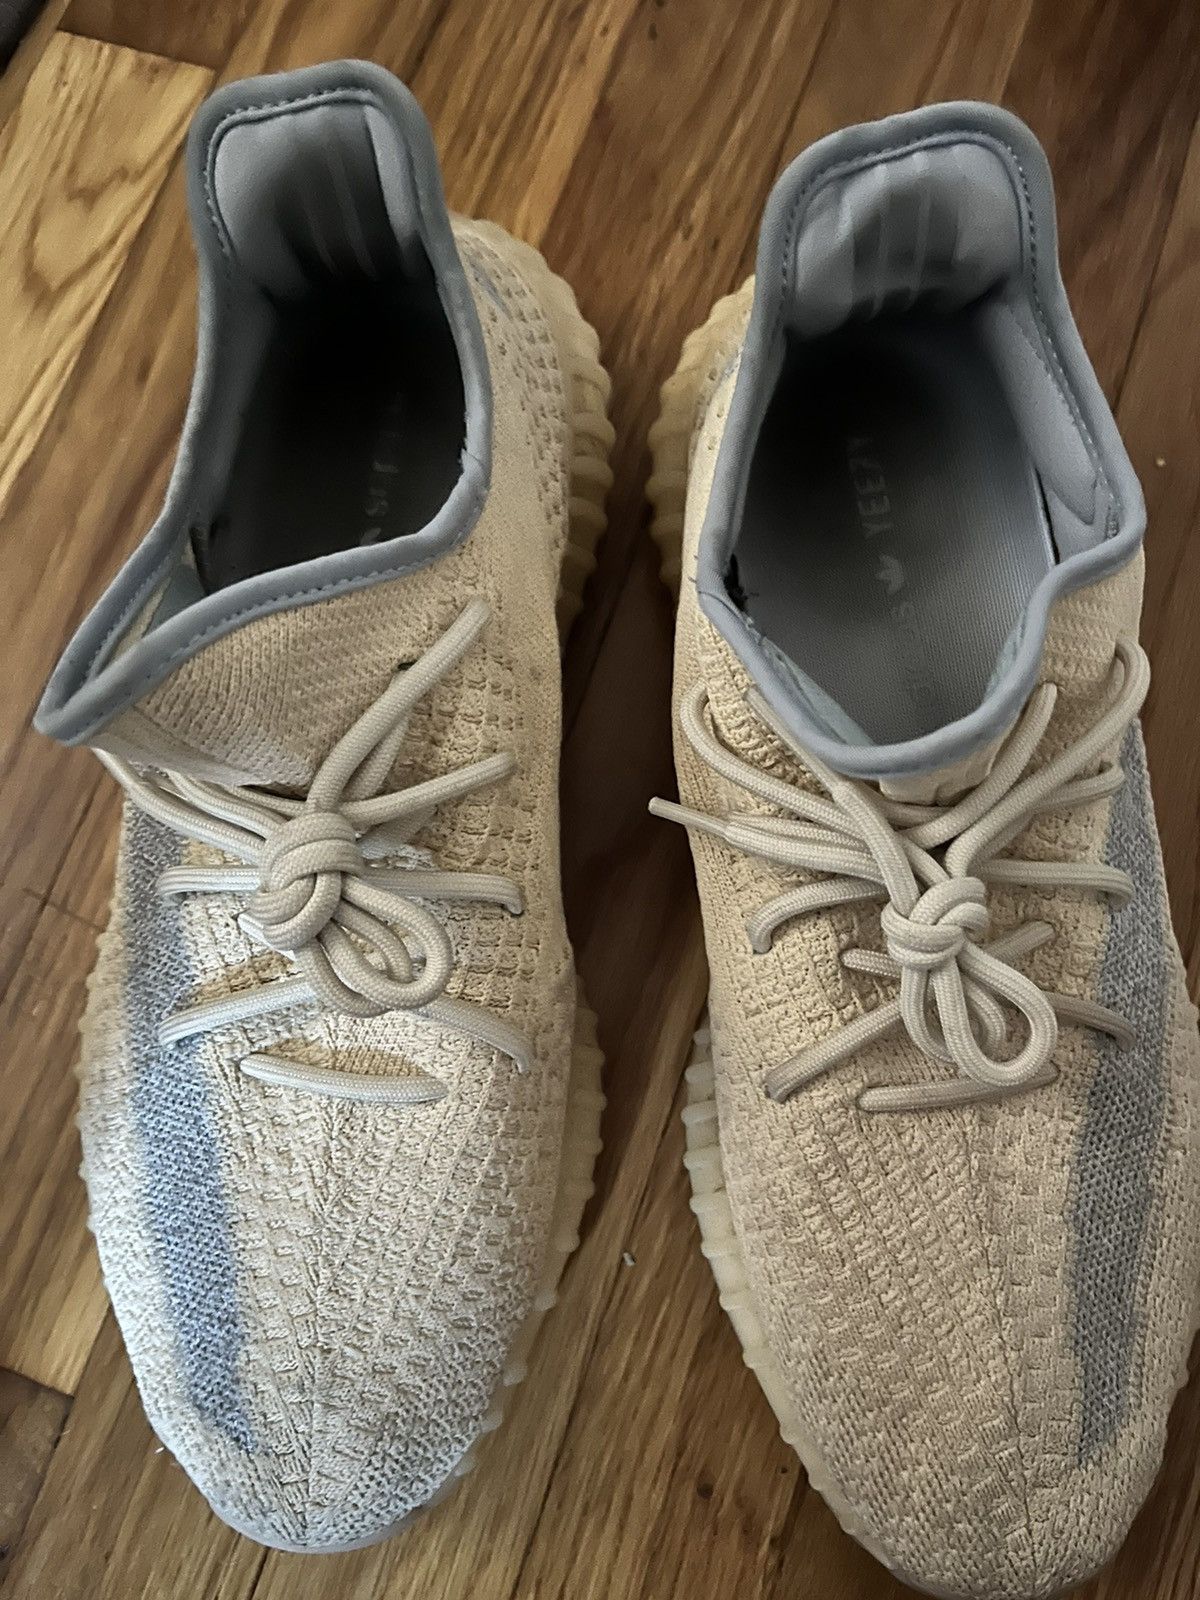 Adidas Yeezy boost v2 Linen Size US 11.5 / EU 44-45 - 1 Preview